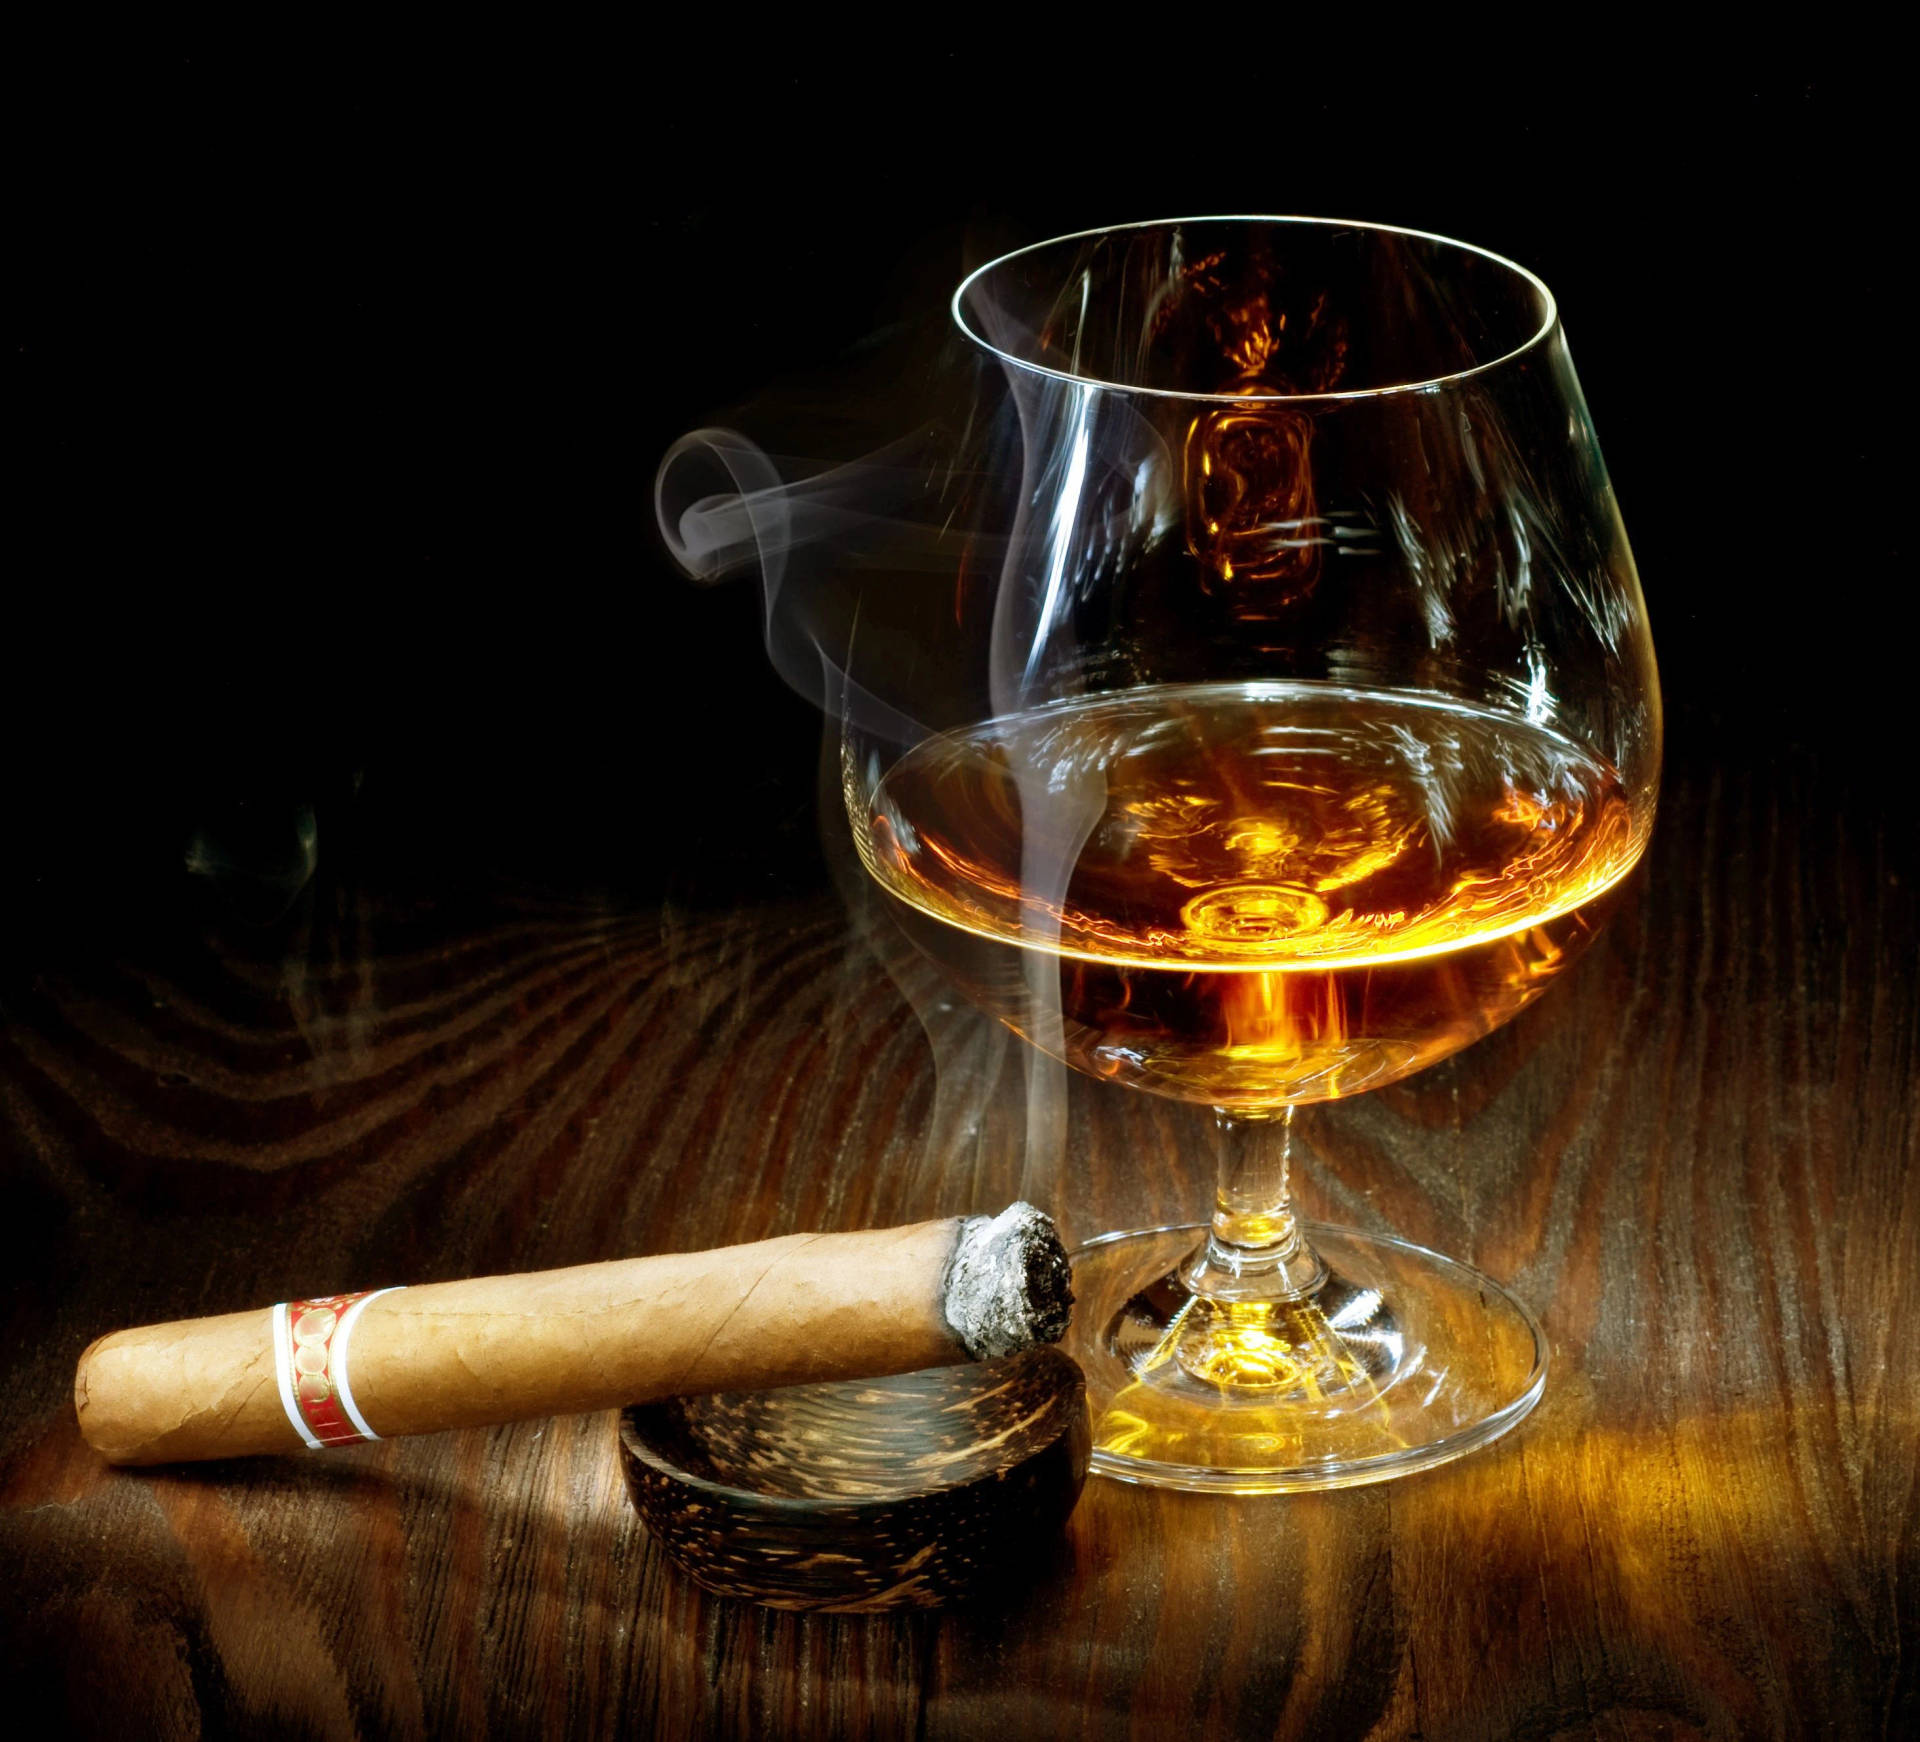 A Smooth Brandy Experience - Pairing Drink With Tobacco